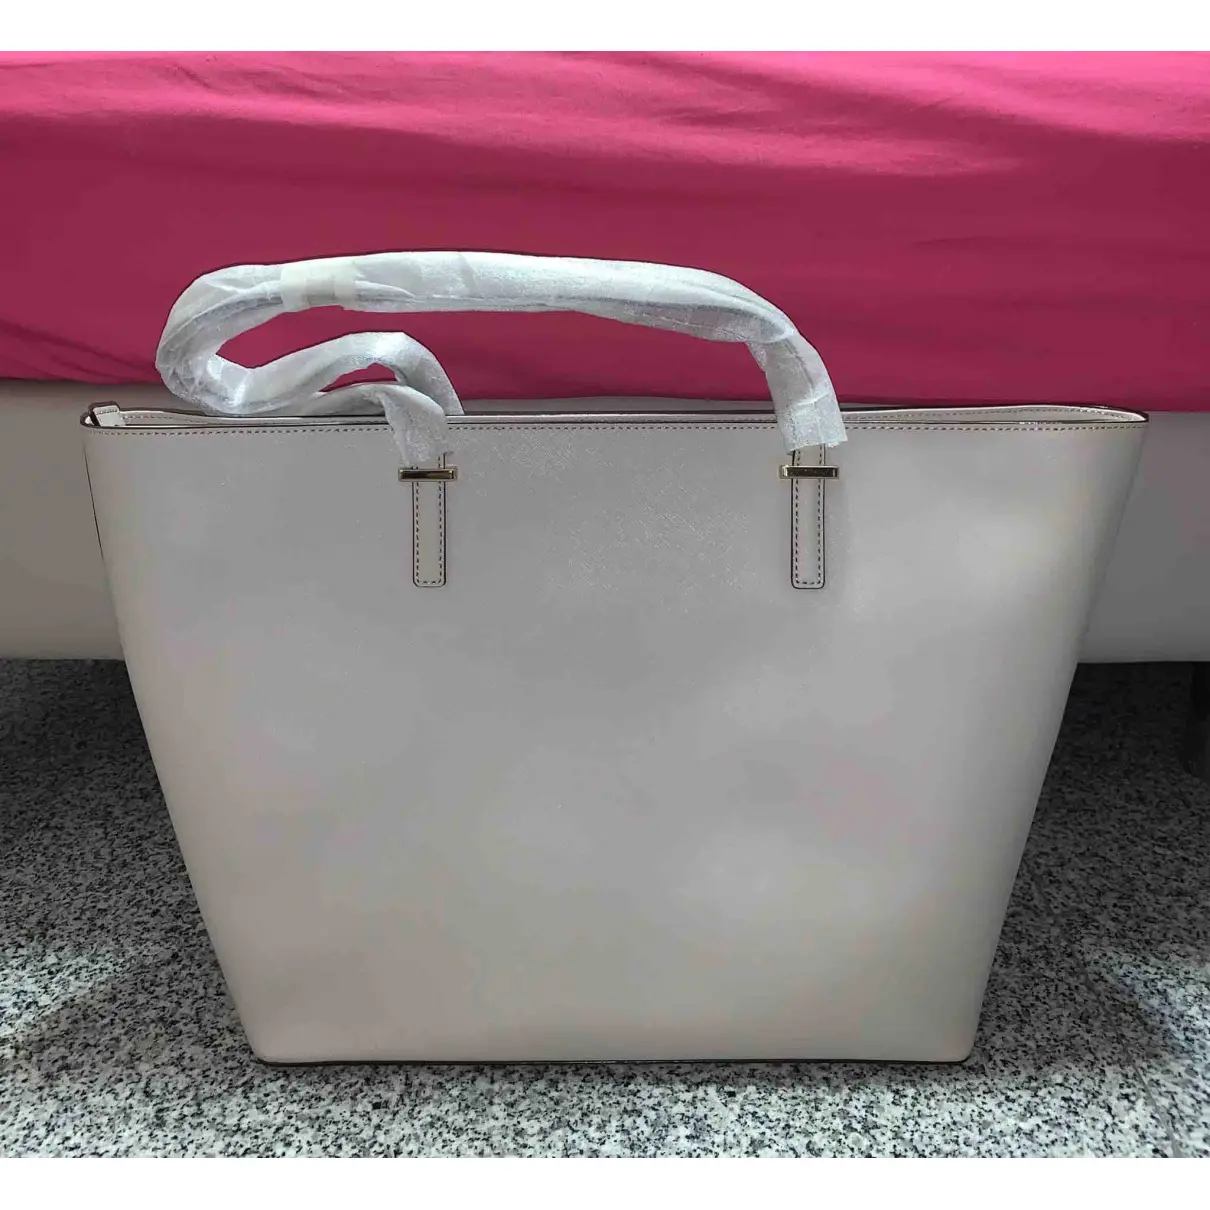 Buy Kate Spade Leather tote online